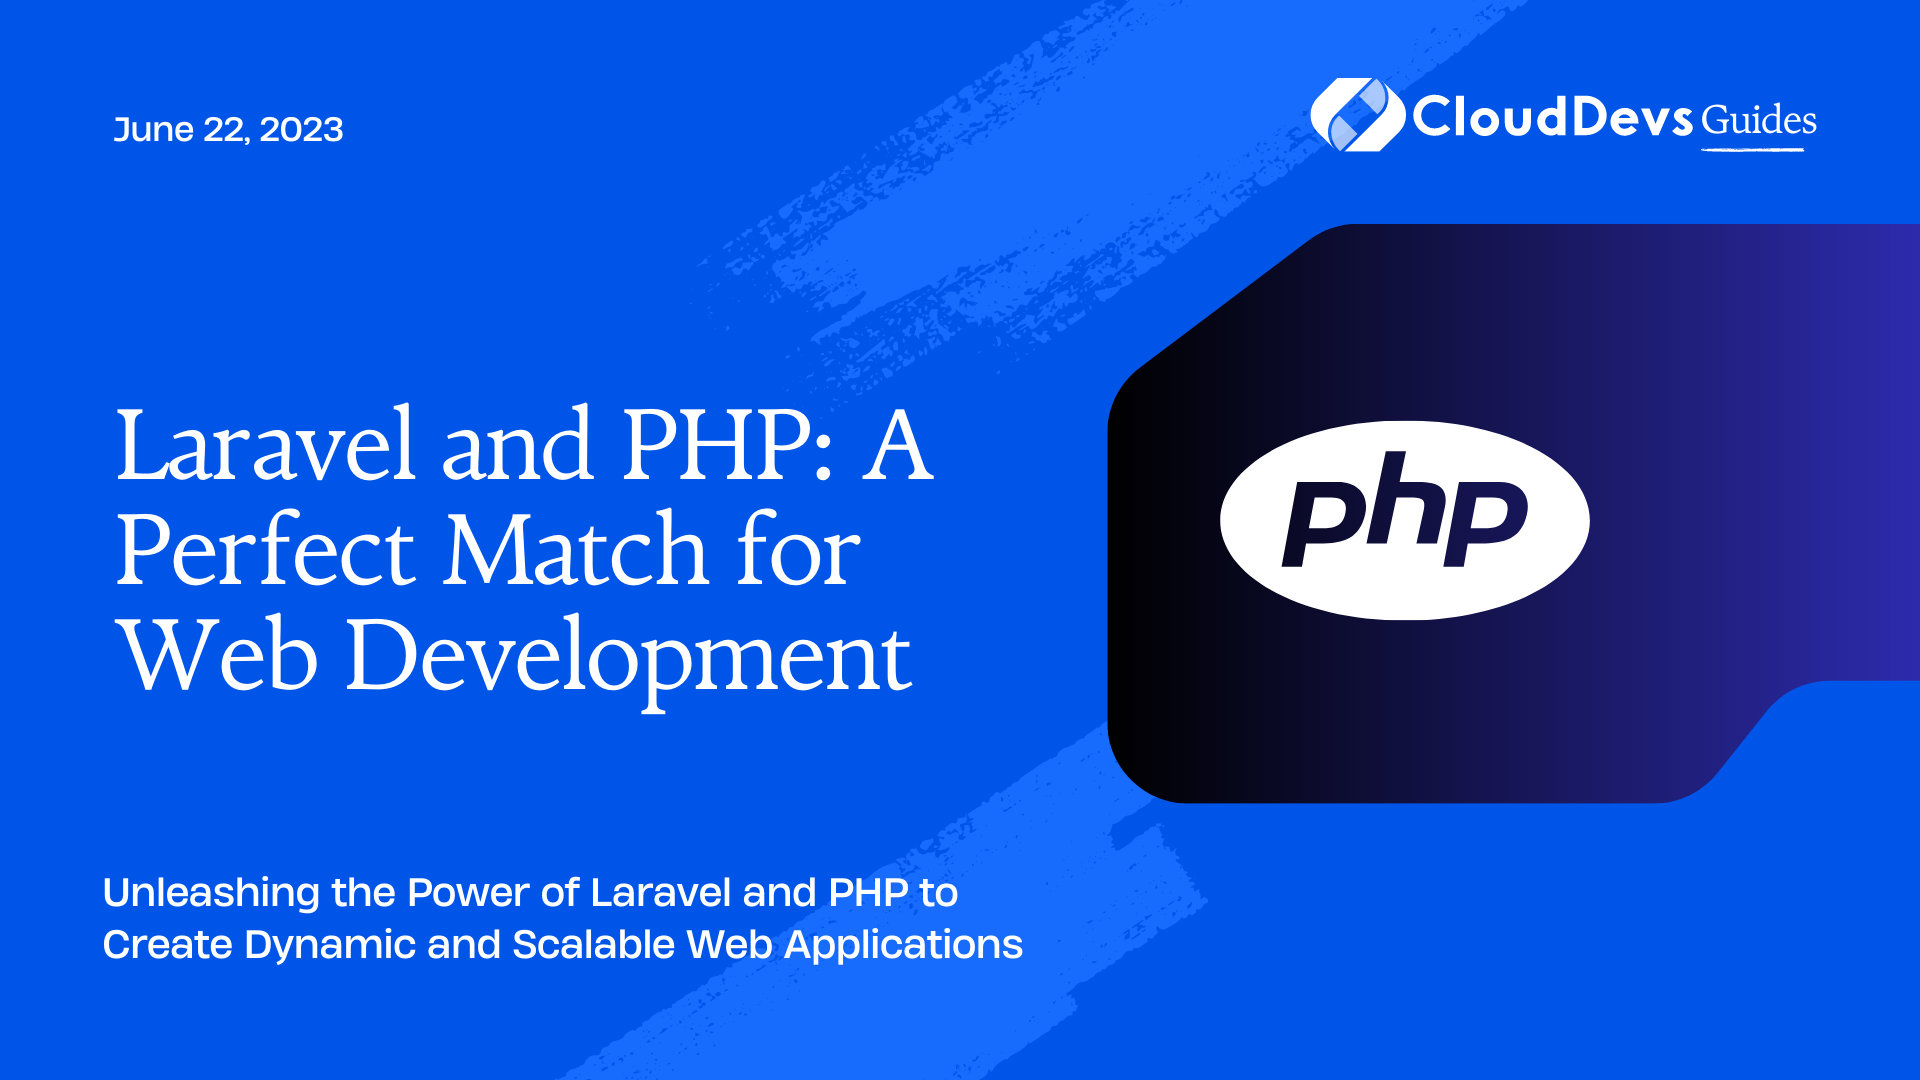 Laravel and PHP: A Perfect Match for Web Development